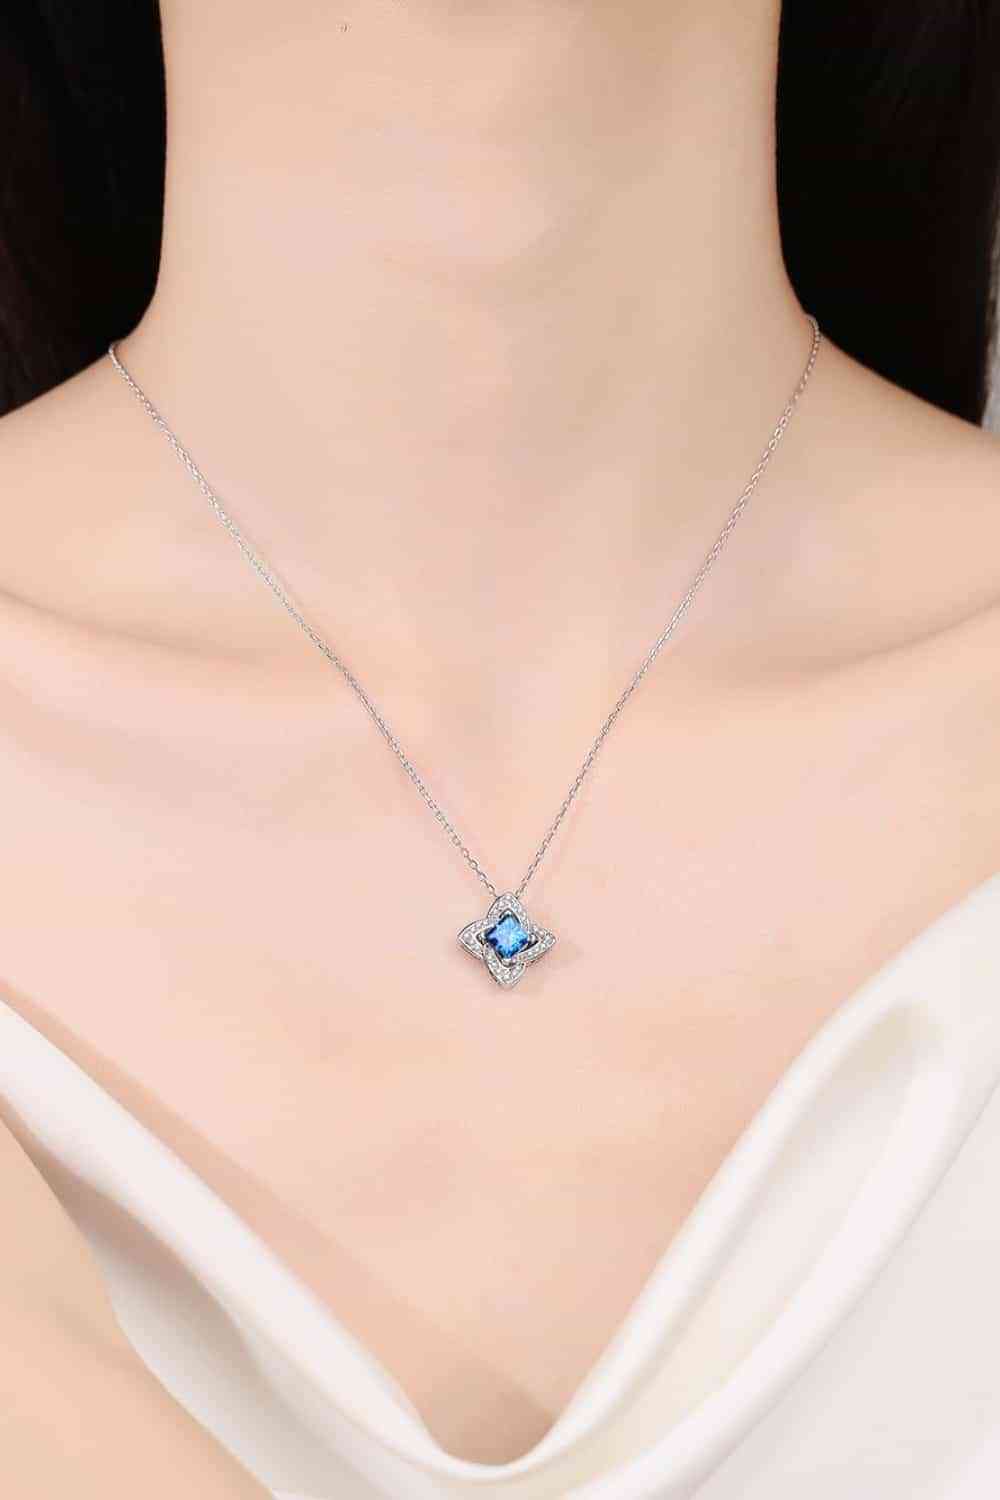 1 Carat Moissanite Floral Pendant Necklace - Shop Tophatter Deals, Electronics, Fashion, Jewelry, Health, Beauty, Home Decor, Free Shipping